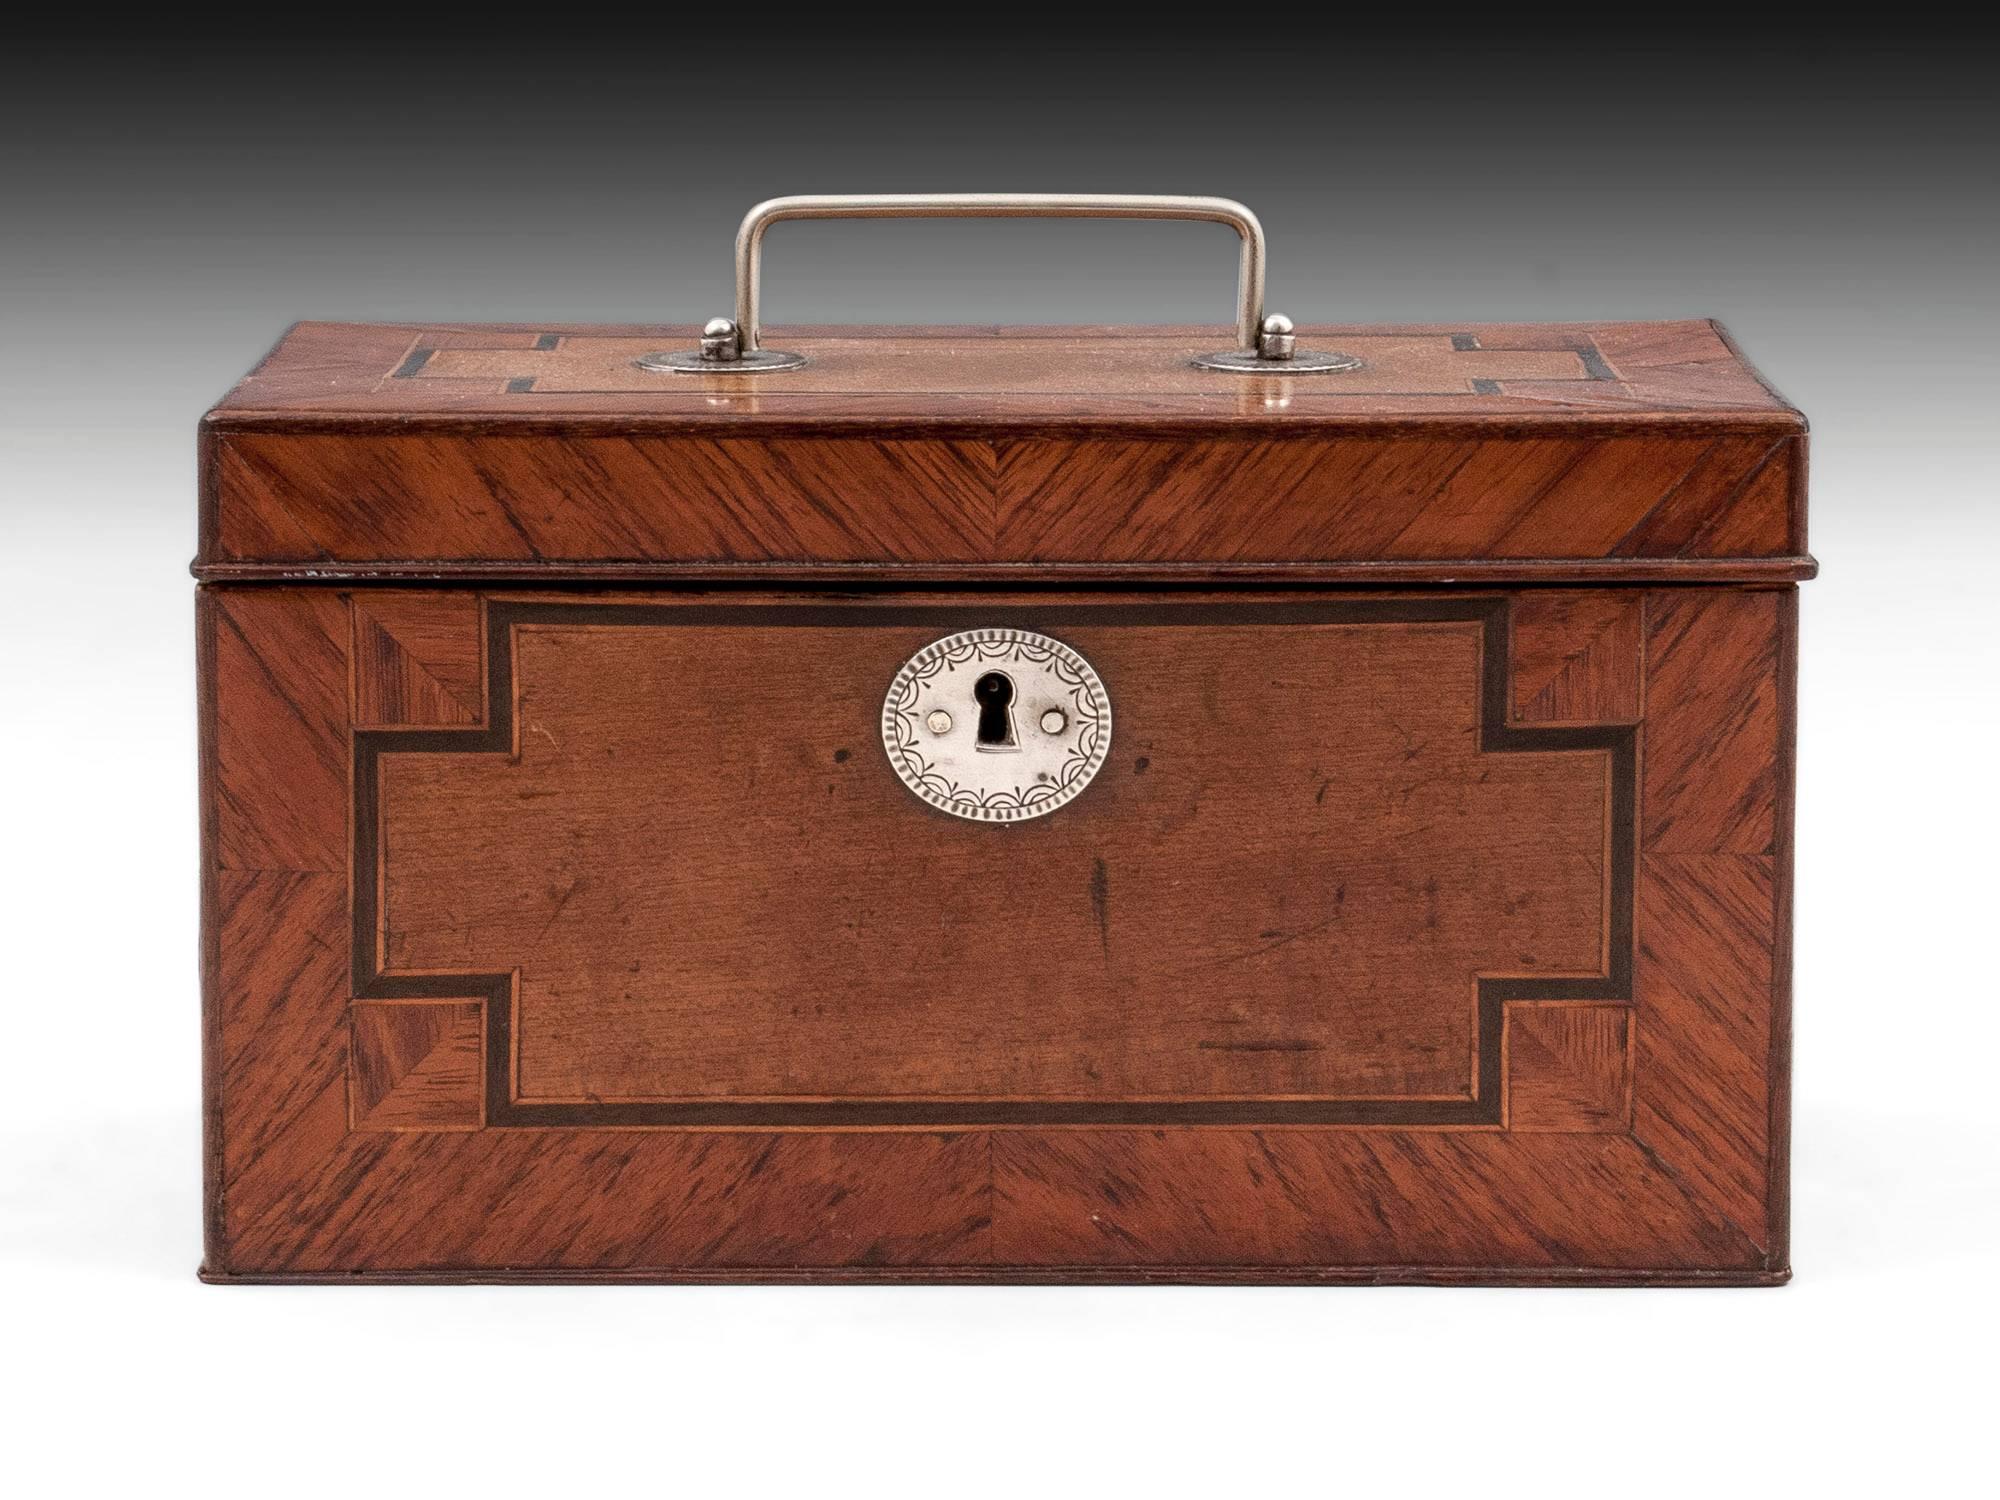 Antique tea chest veneered predominantly in hare wood with decorative crossbanded kingwood and ebony. The tea chest has a silver handle and engraved silver escutcheon.

The interior of this lovely tea chest features three compartments with